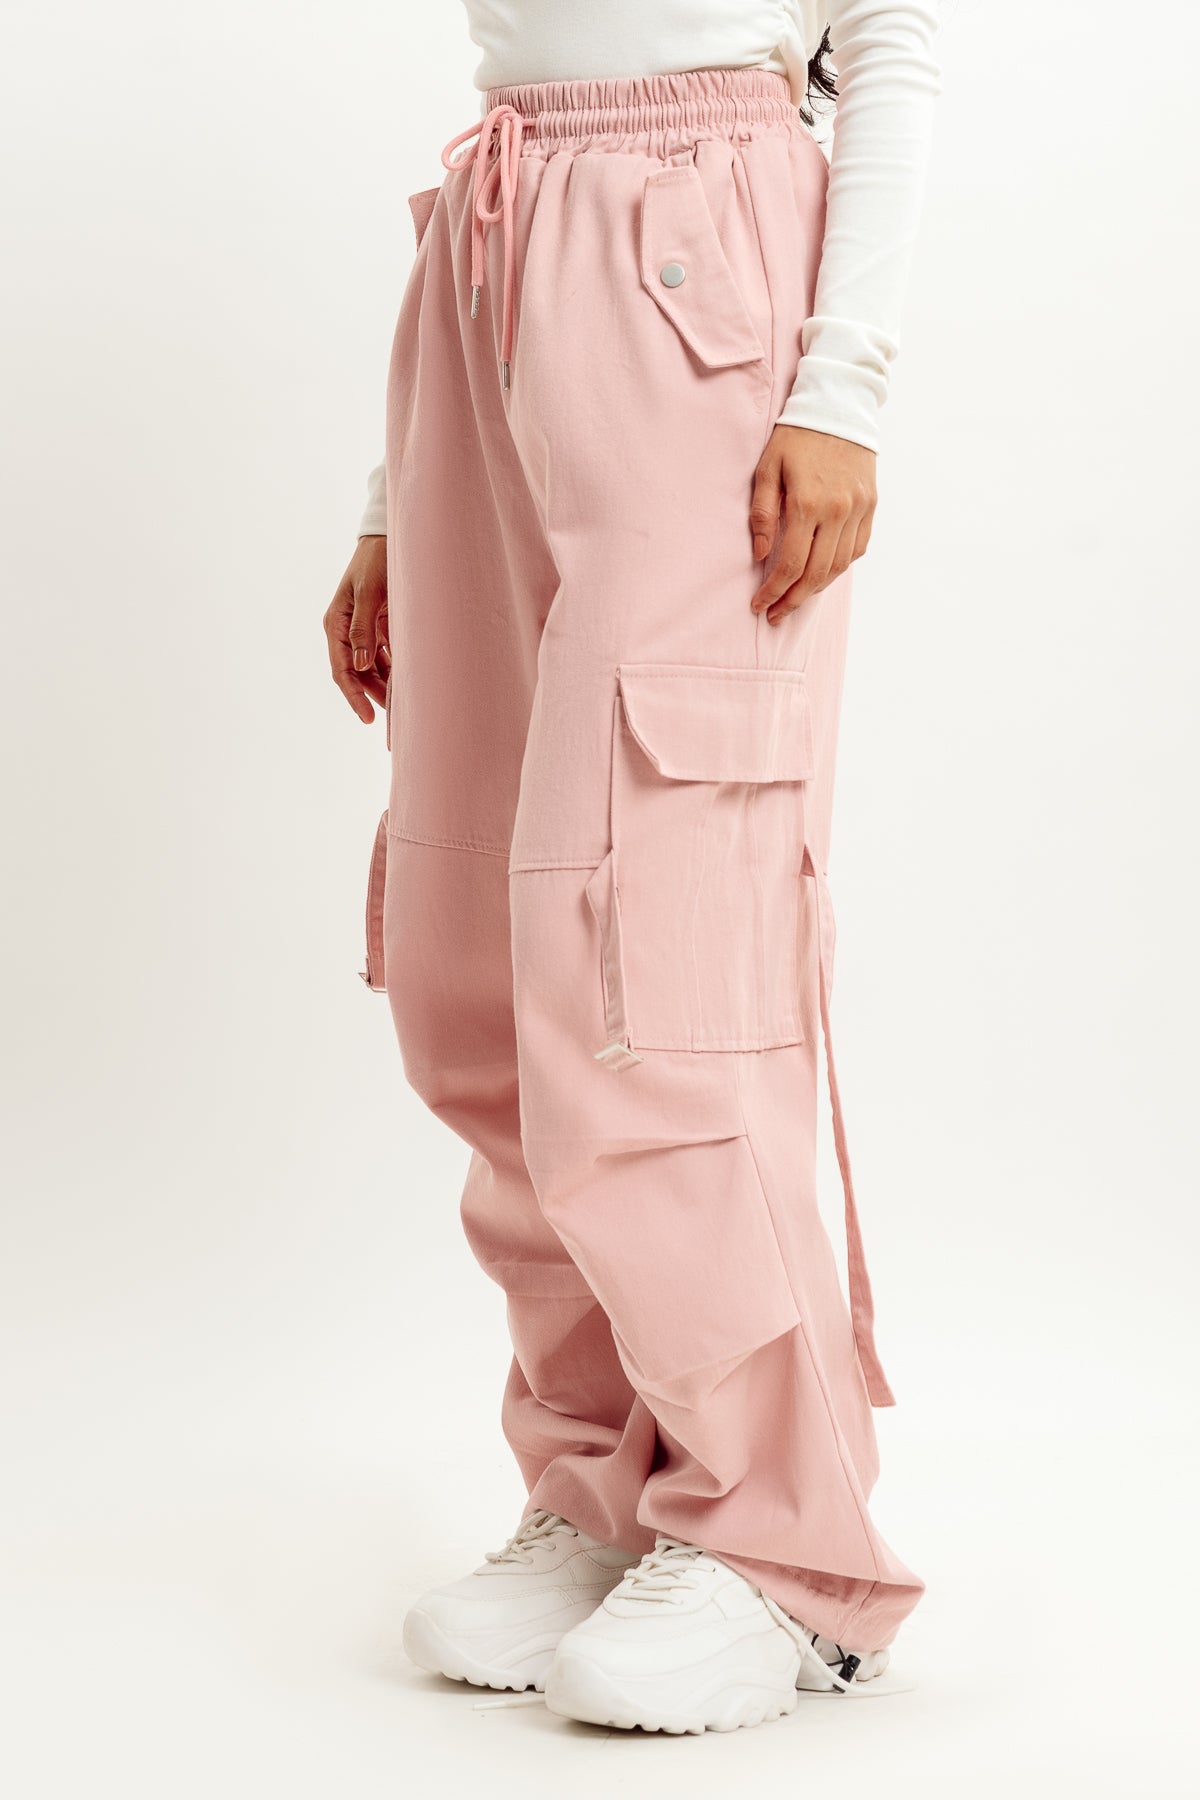 PINK STREET STYLE CARGO PANT